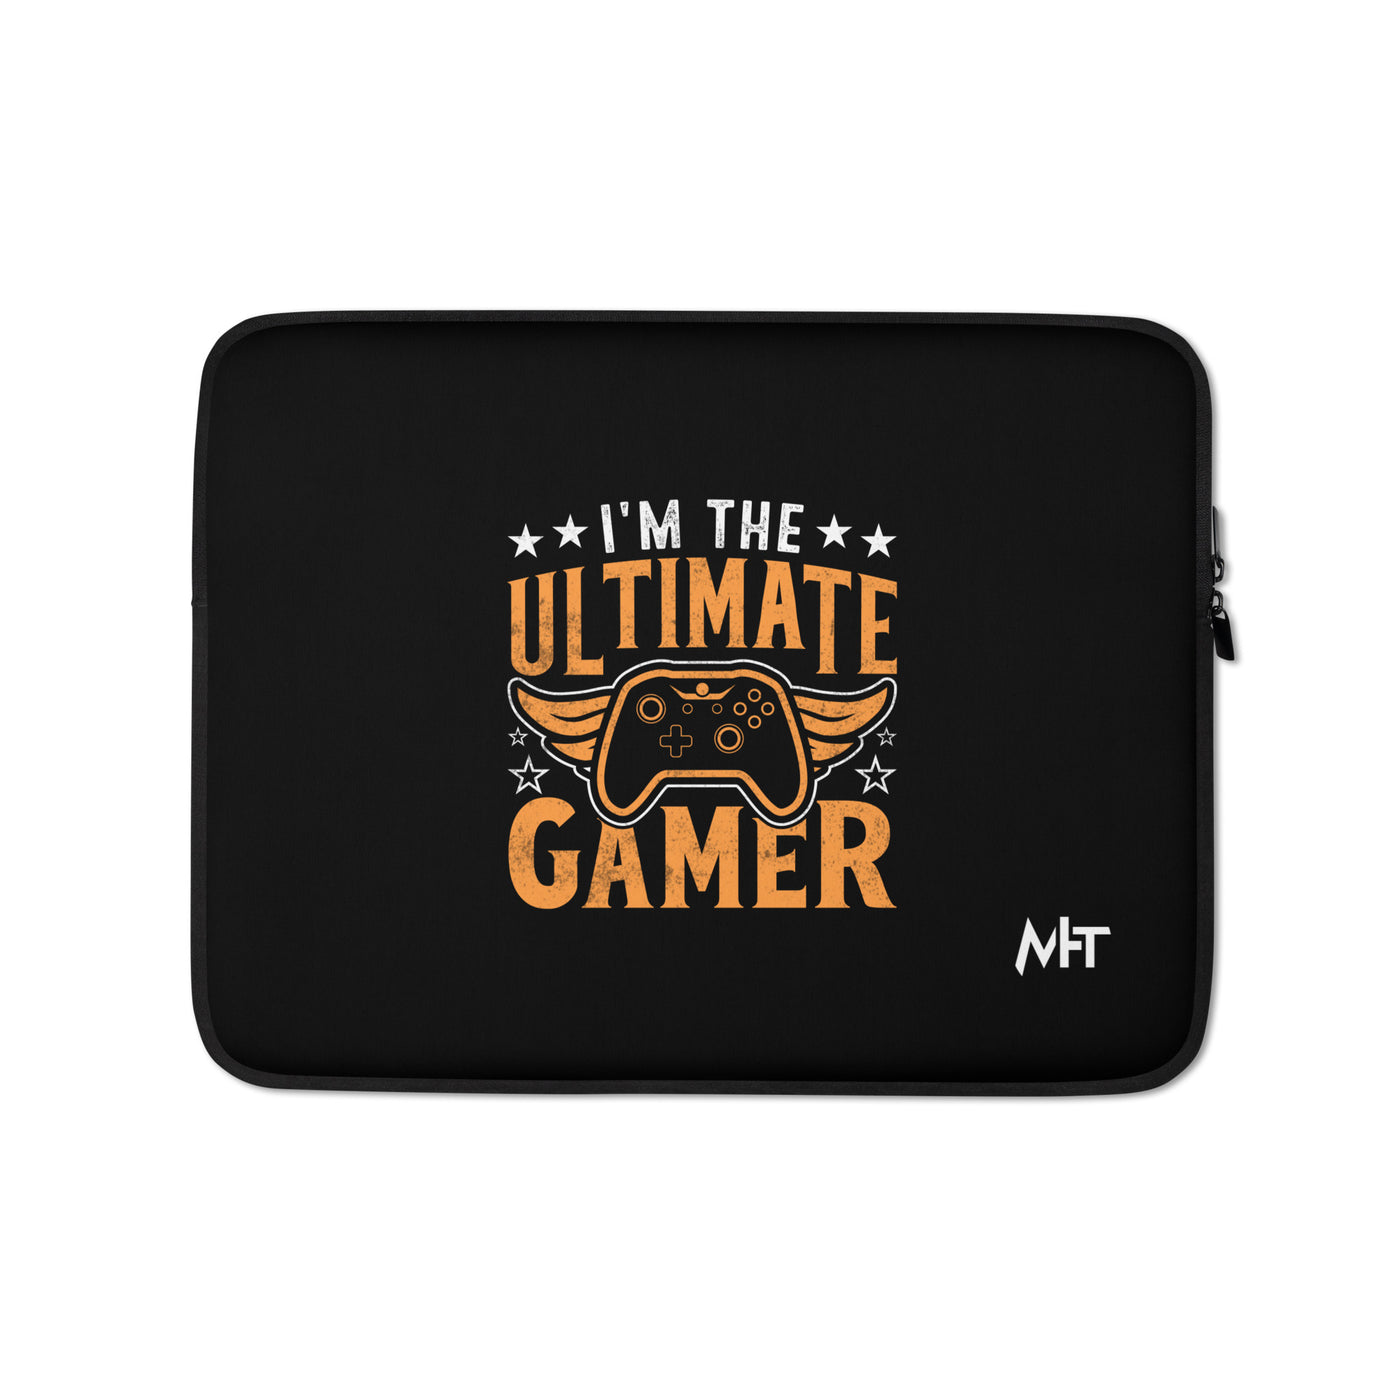 I am the Ultimate Gamer - Laptop Sleeve